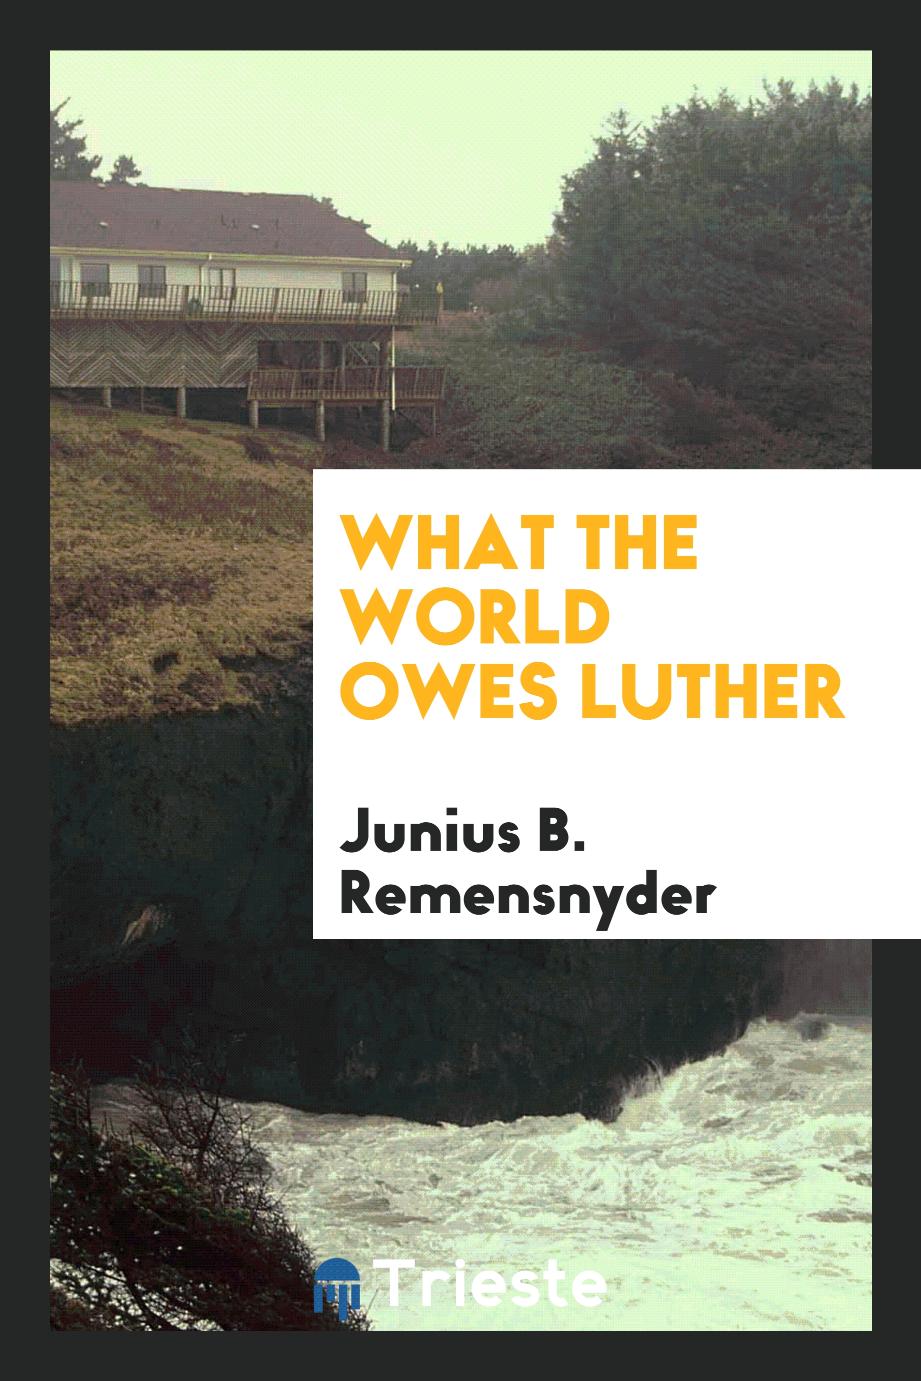 What the world owes Luther